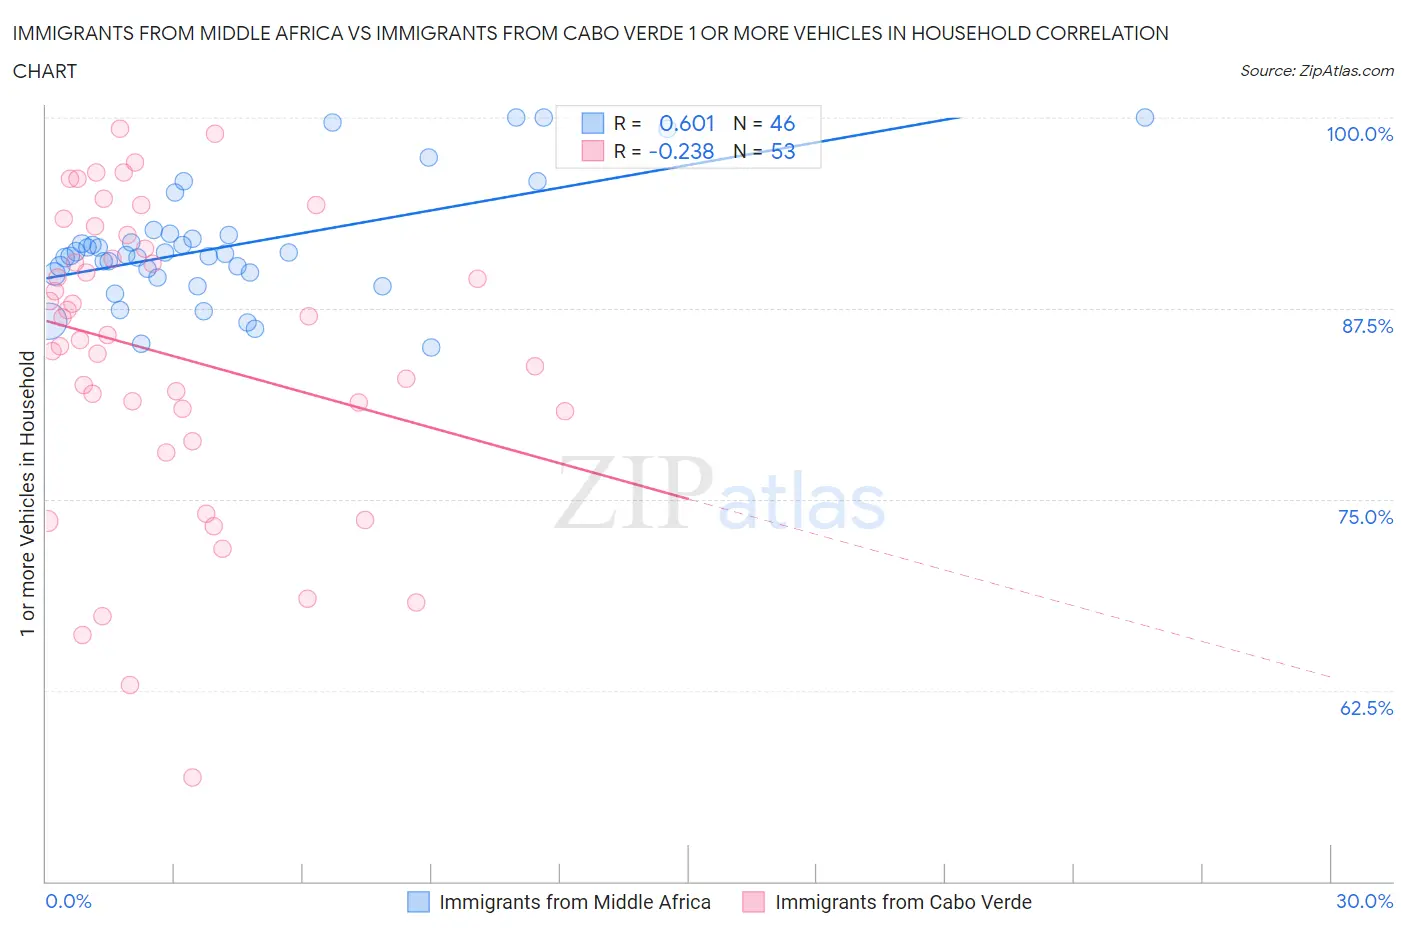 Immigrants from Middle Africa vs Immigrants from Cabo Verde 1 or more Vehicles in Household